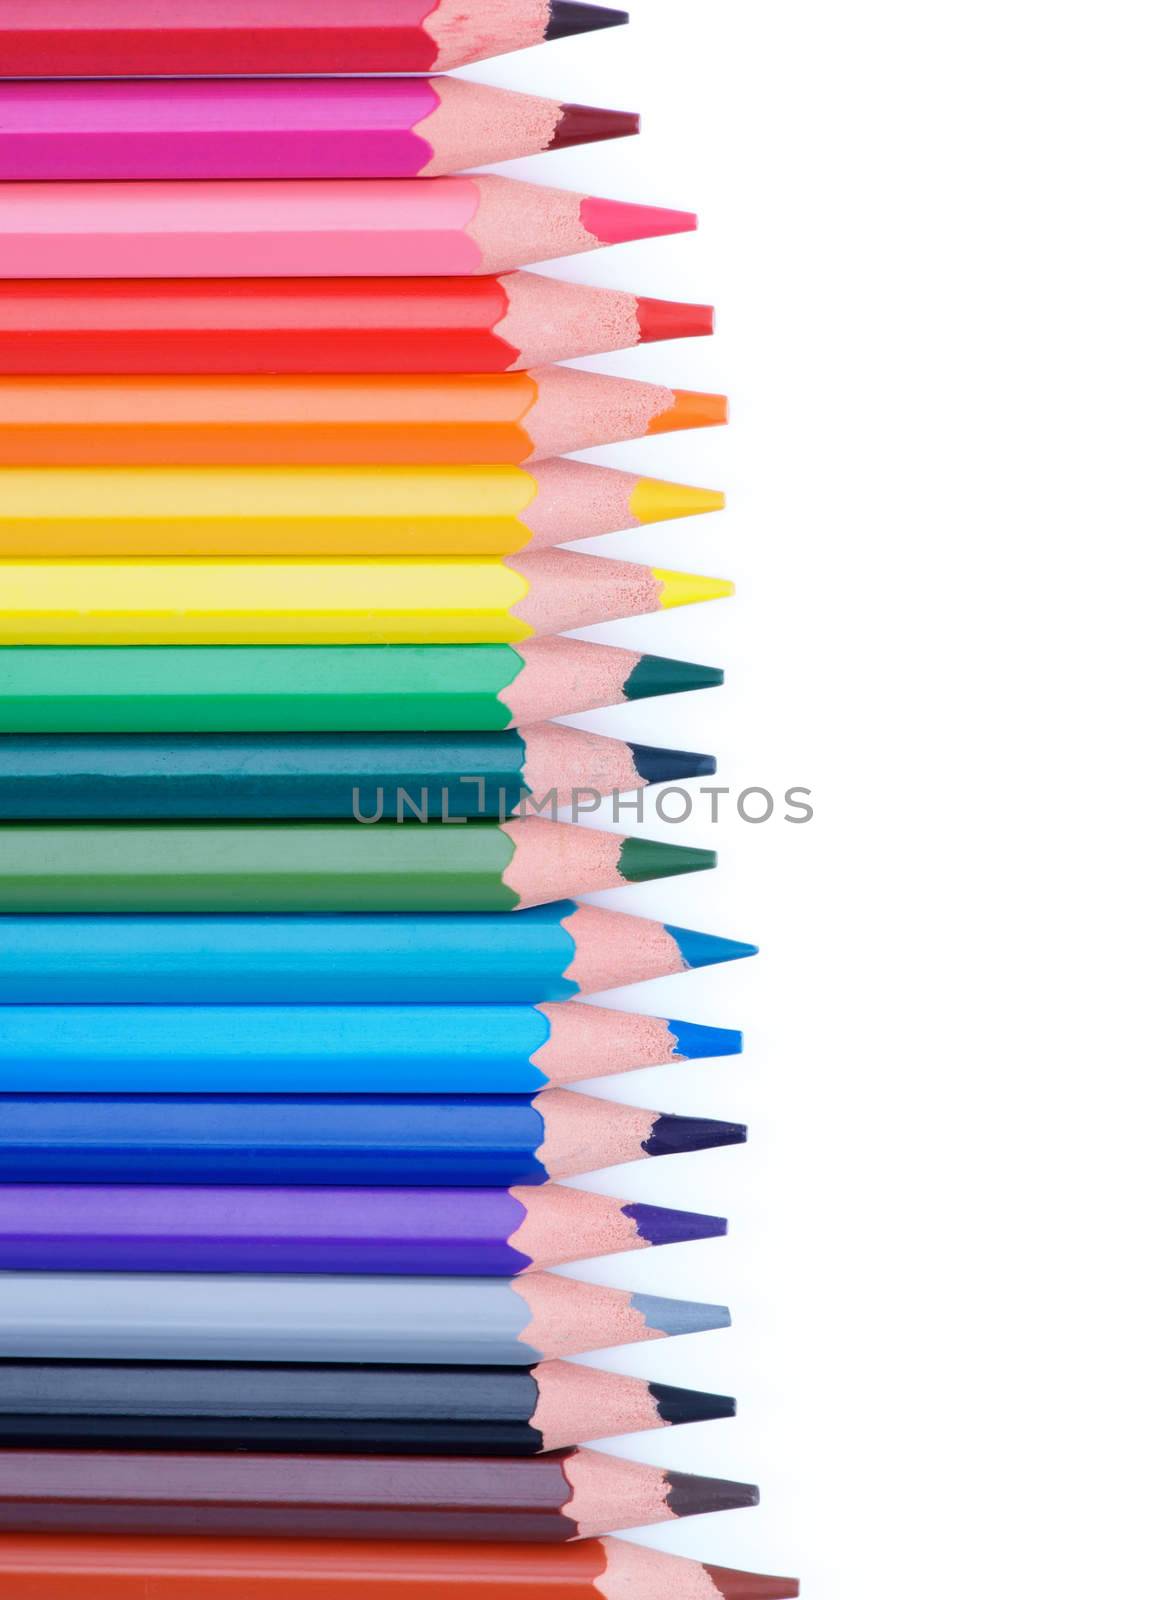 Colorful Pencils Frame by zhekos